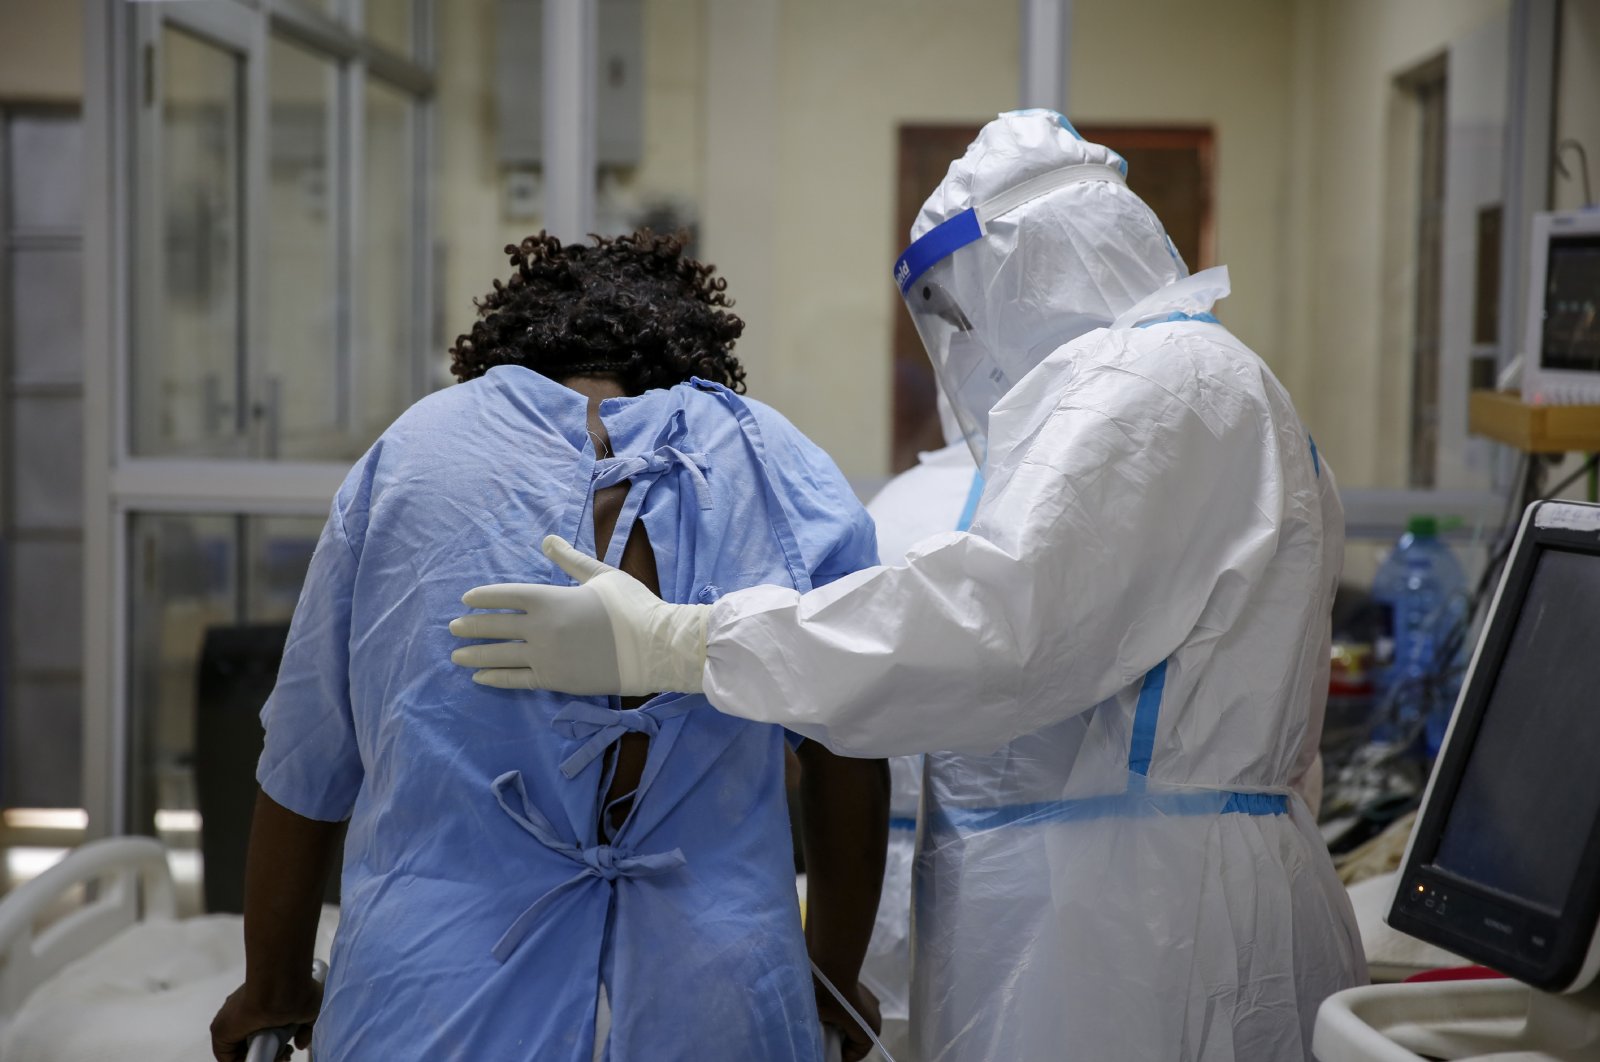 A medical worker attends to a coronavirus patient in the intensive care unit of an isolation and treatment center for those with COVID-19 in Machakos, south of the capital Nairobi, in Kenya, Nov. 3, 2020. (AP Photo)